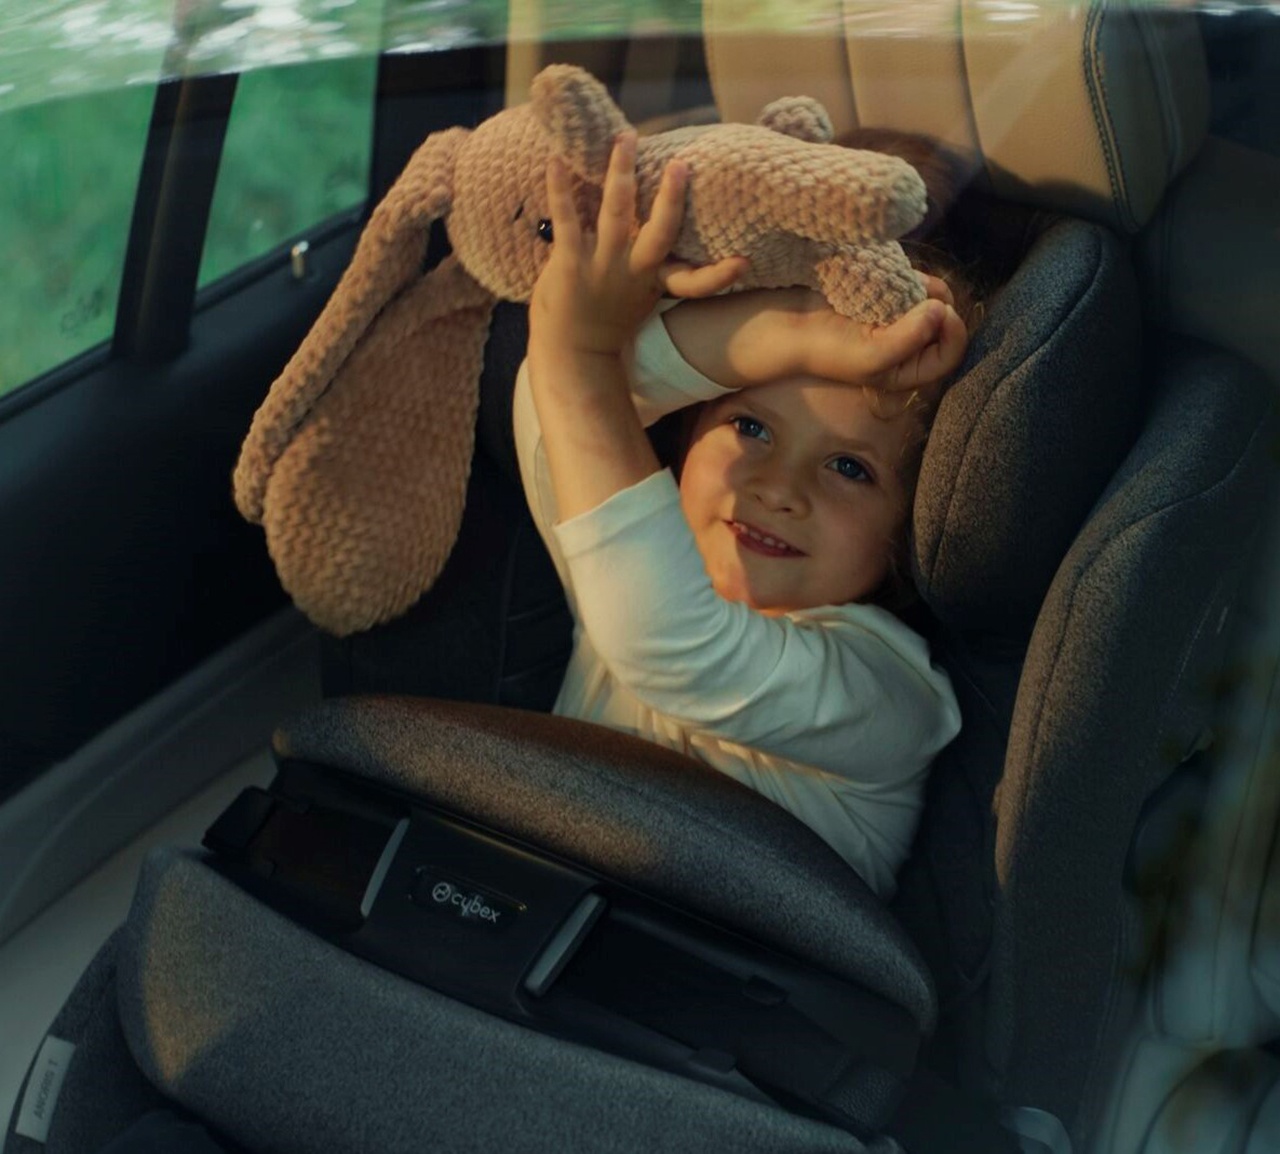 Child restraint systems: Lack of ownership, usage and knowledge remain a key issue of road safety in the UAE